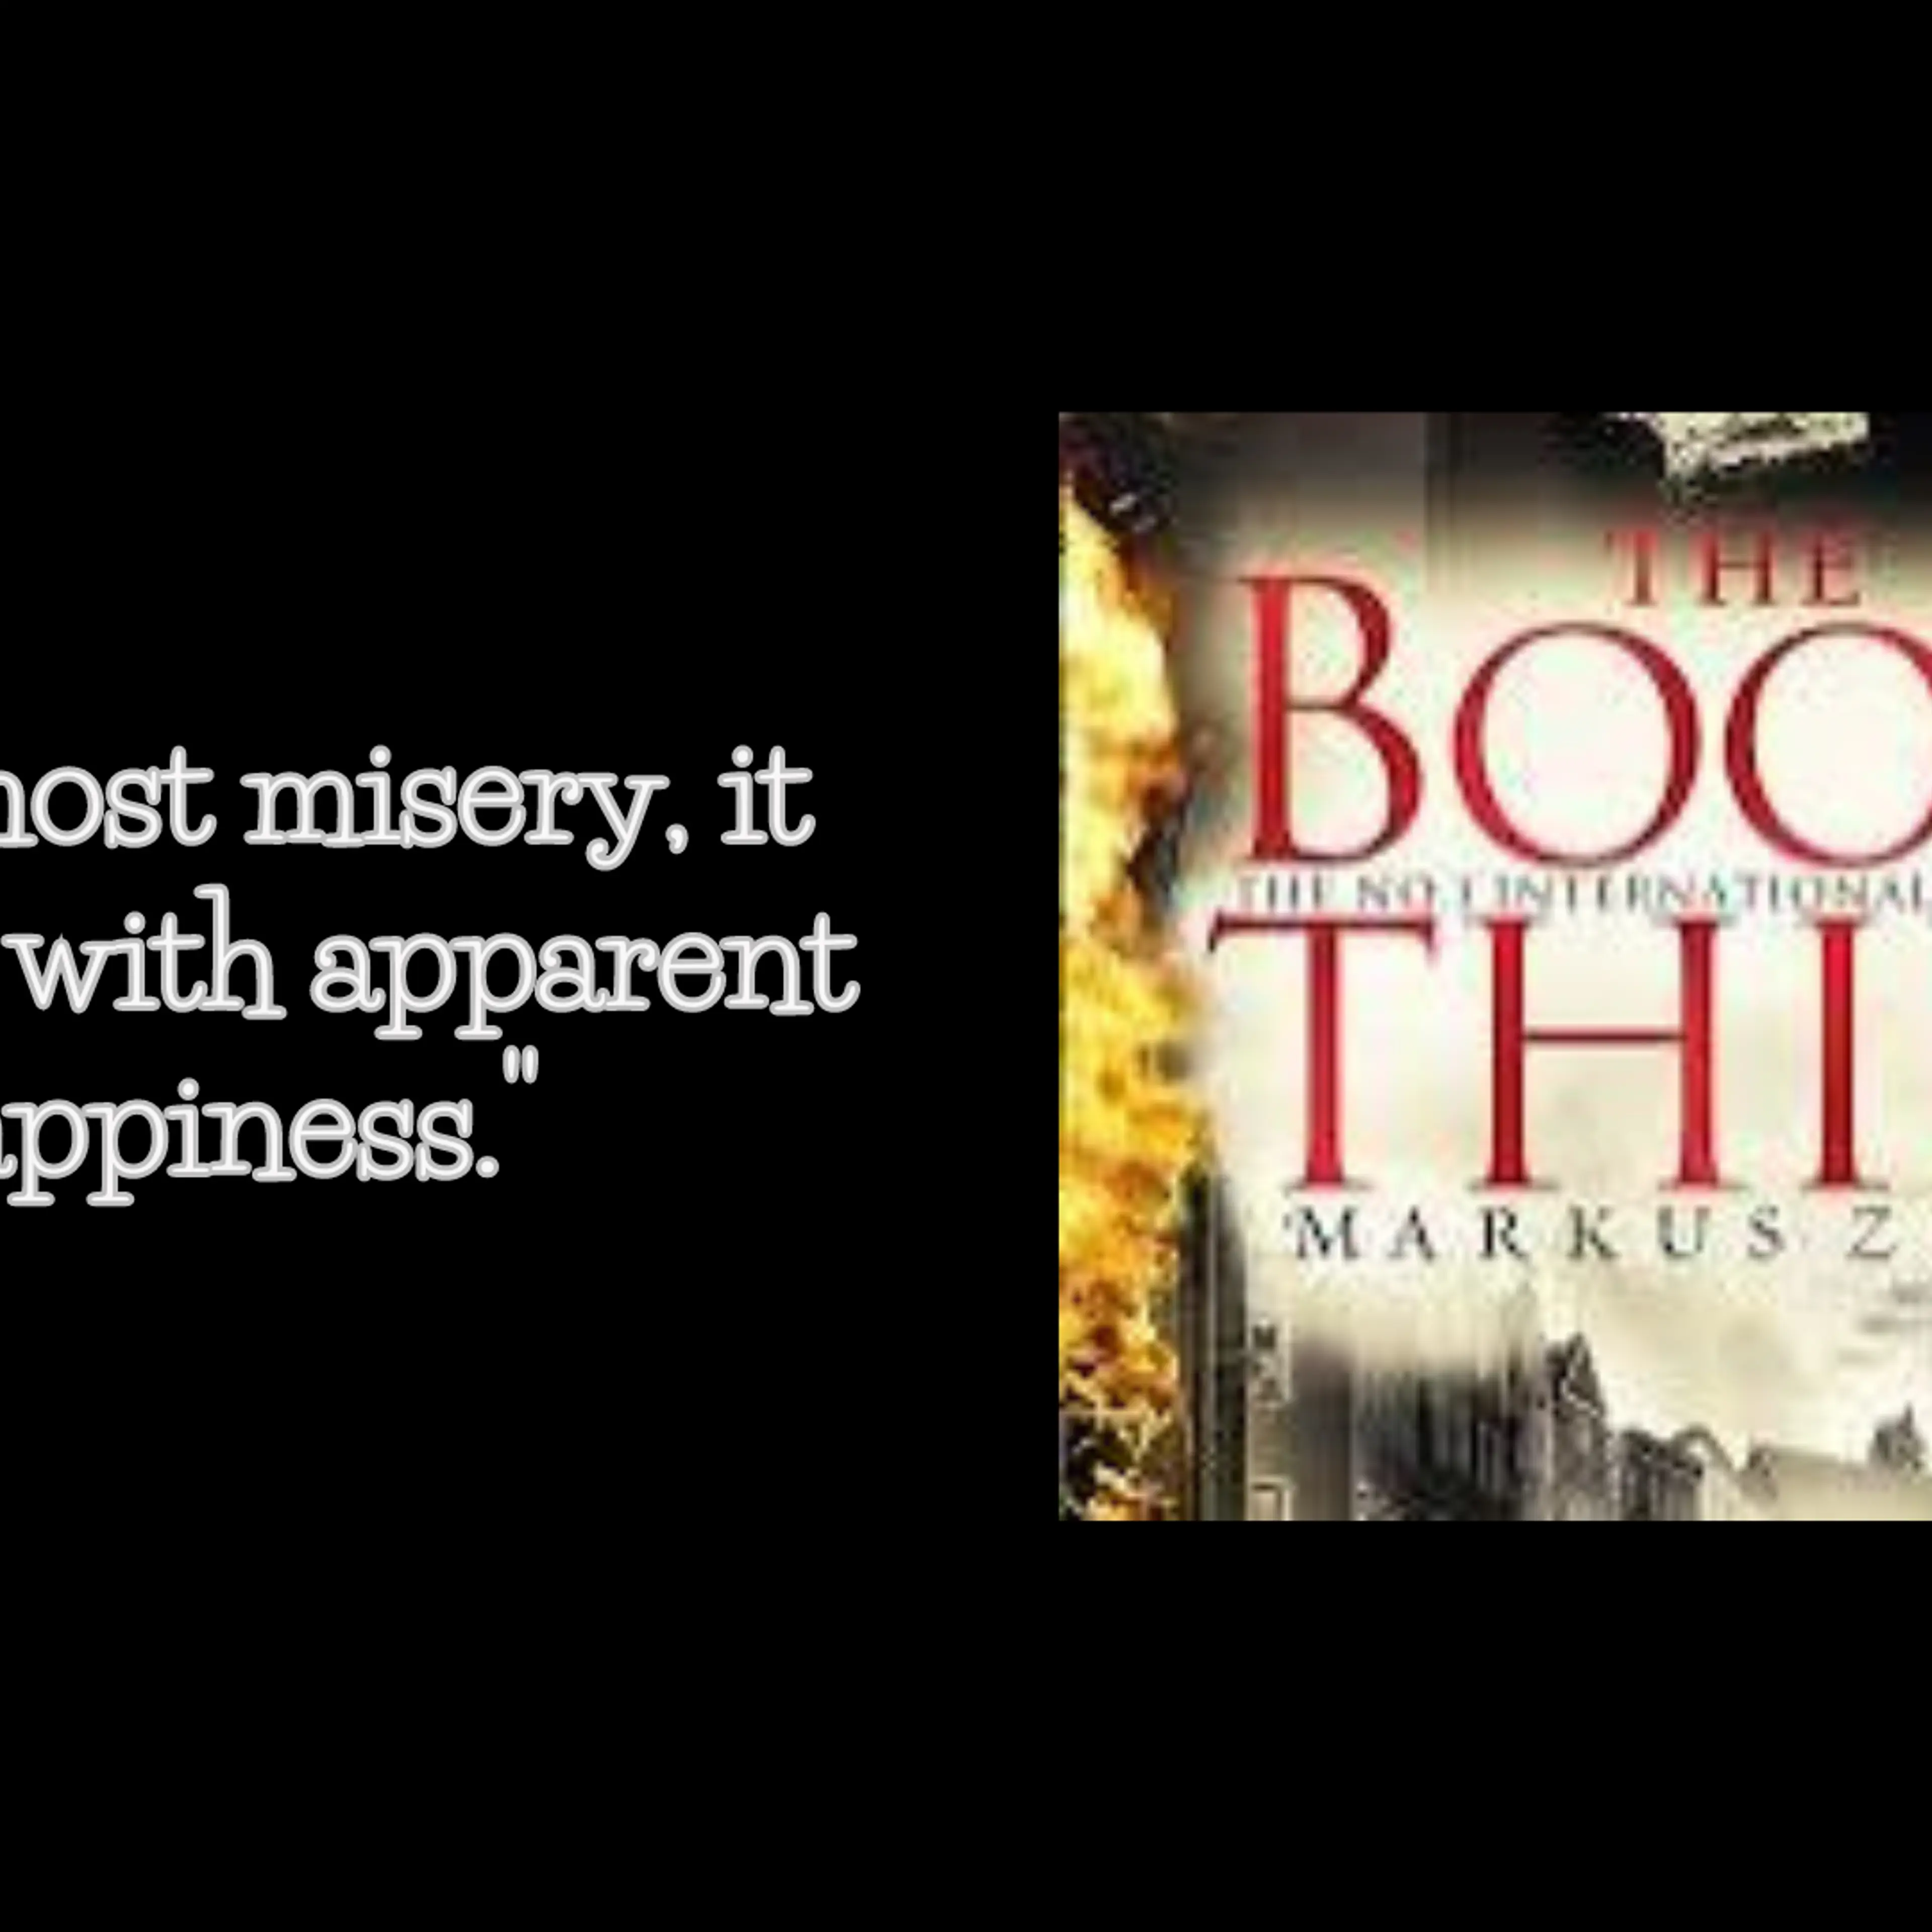 The Book Thief: 10 quotes to find wisdom amidst chaos